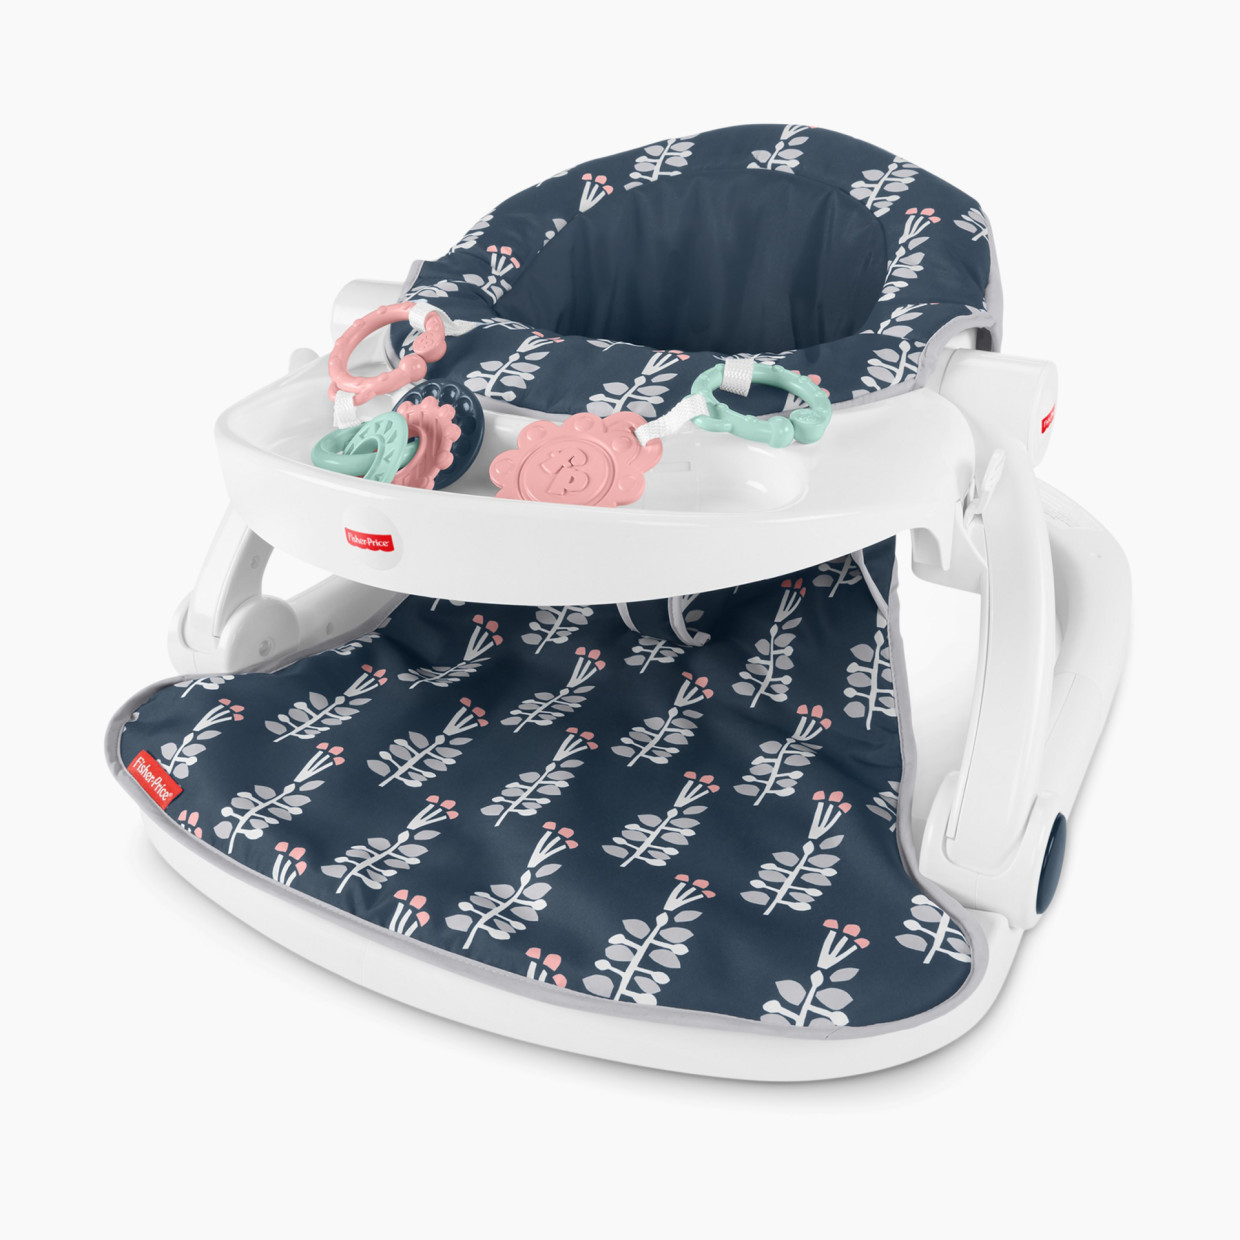 Fisher-Price Sit-Me-Up Floor Seat with Tray - Navy Garden.